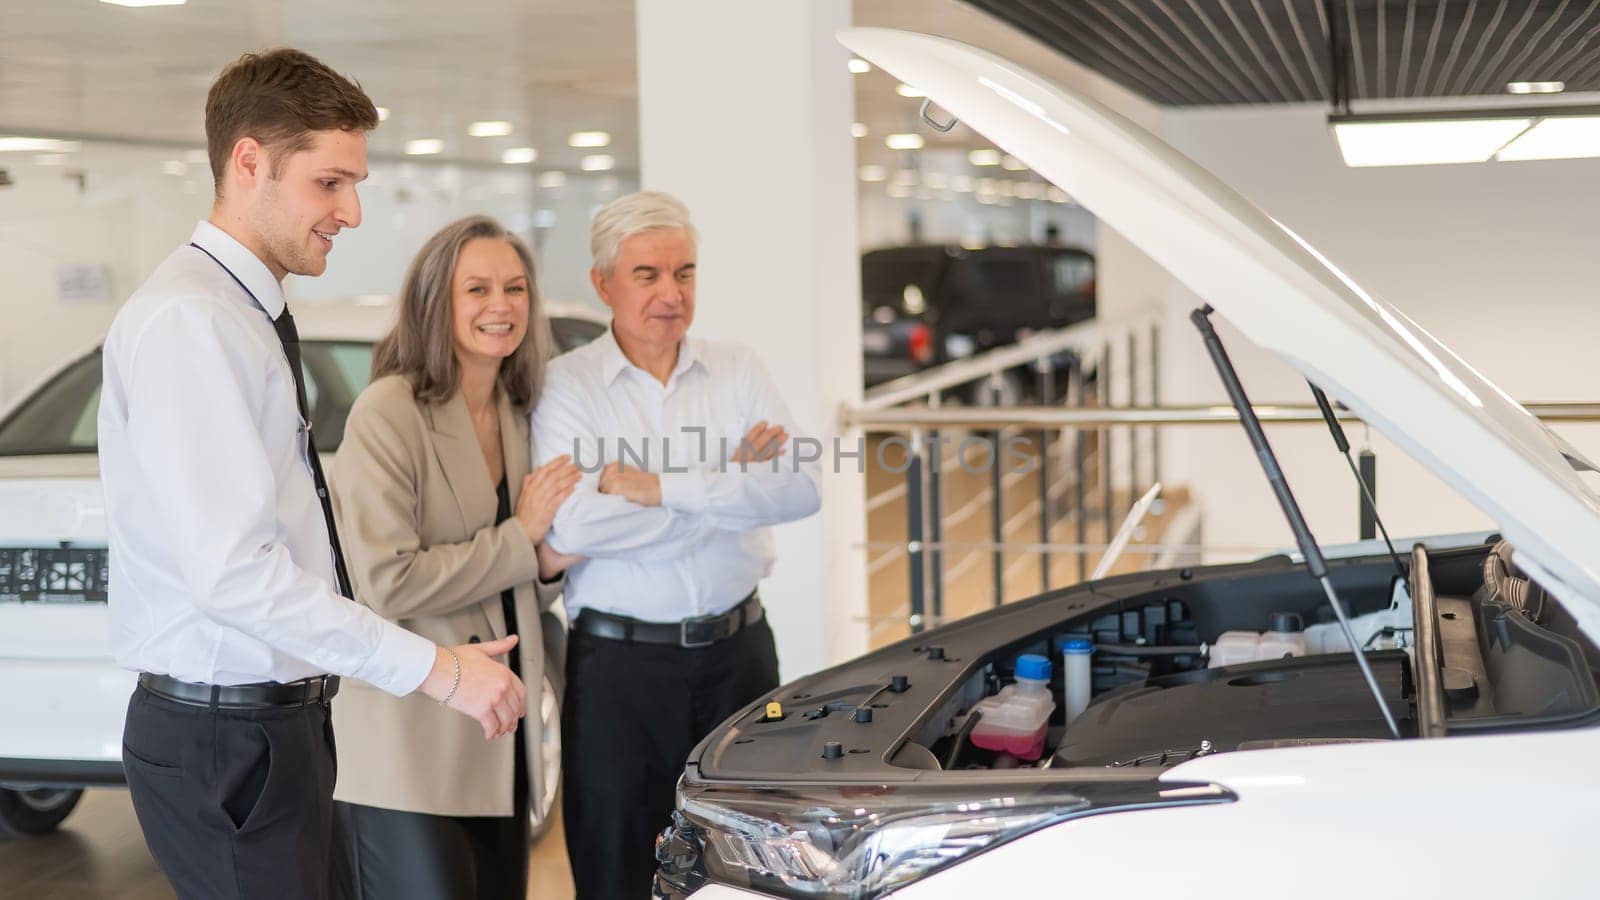 A salesman demonstrates a car with an open hood to an elderly Caucasian couple in a car dealership. by mrwed54